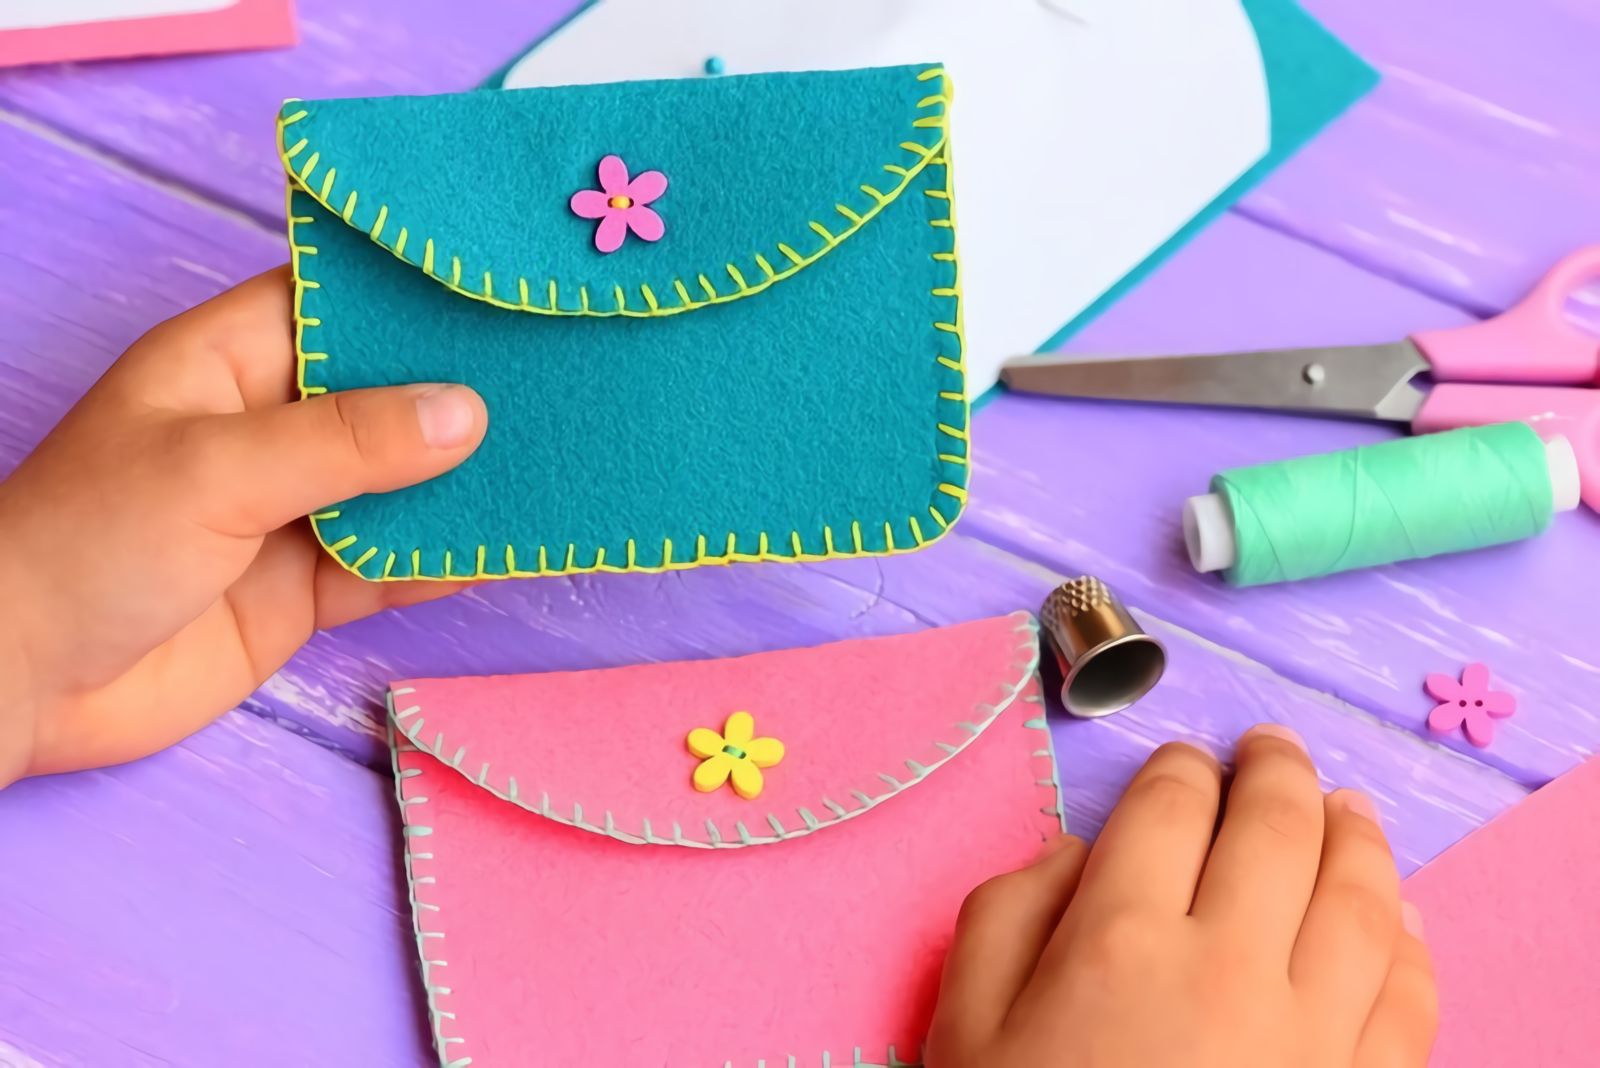 How to Teach Kids to Sew